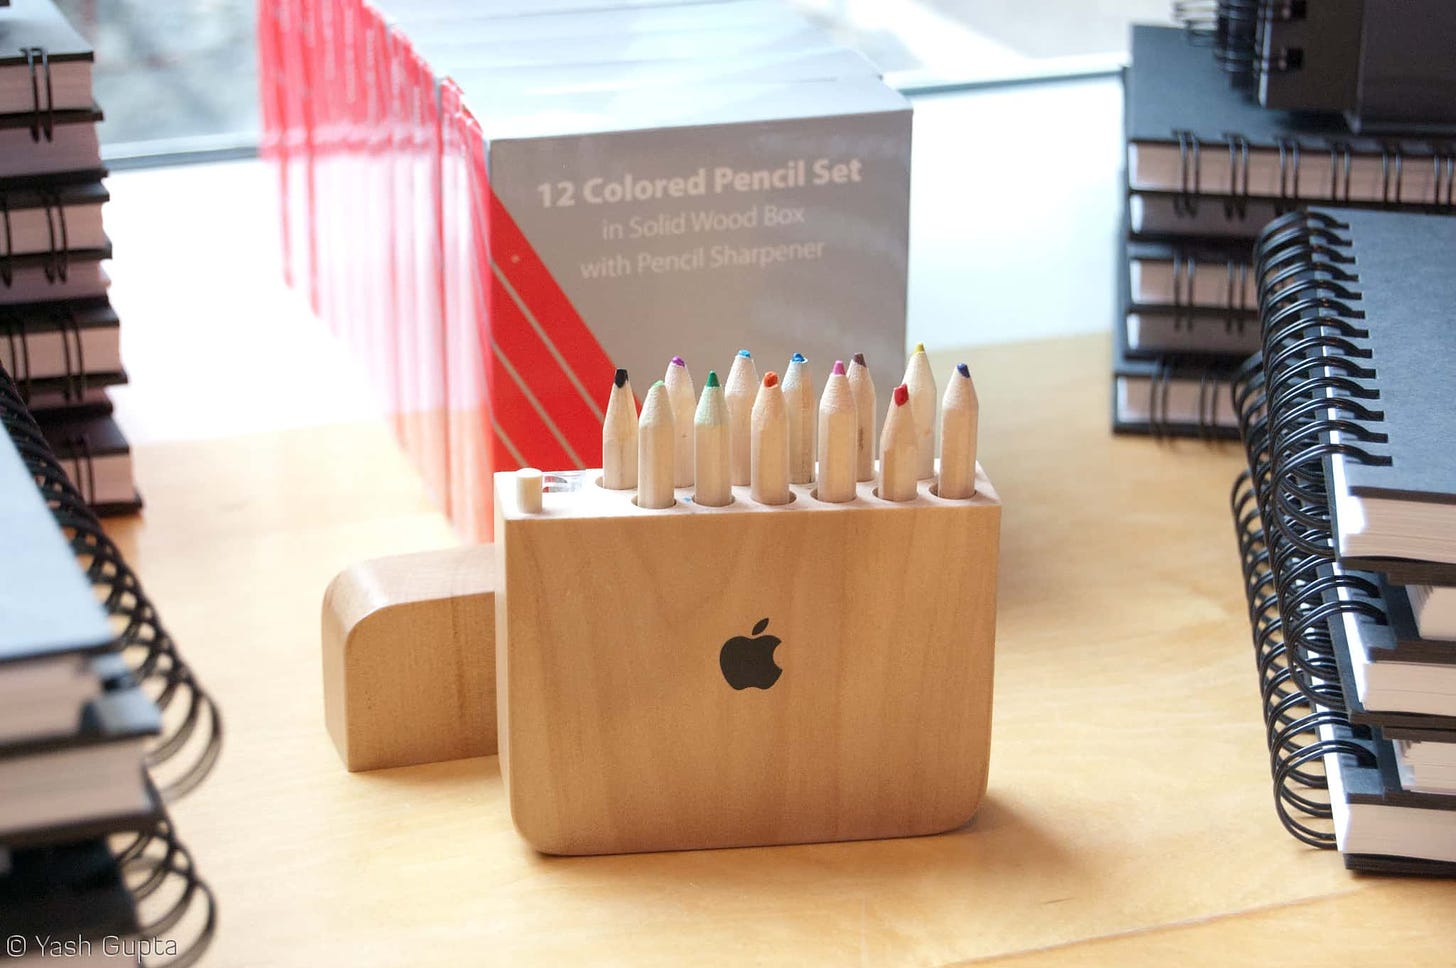 A 12 Colored Pencil set once available at The Company Store.